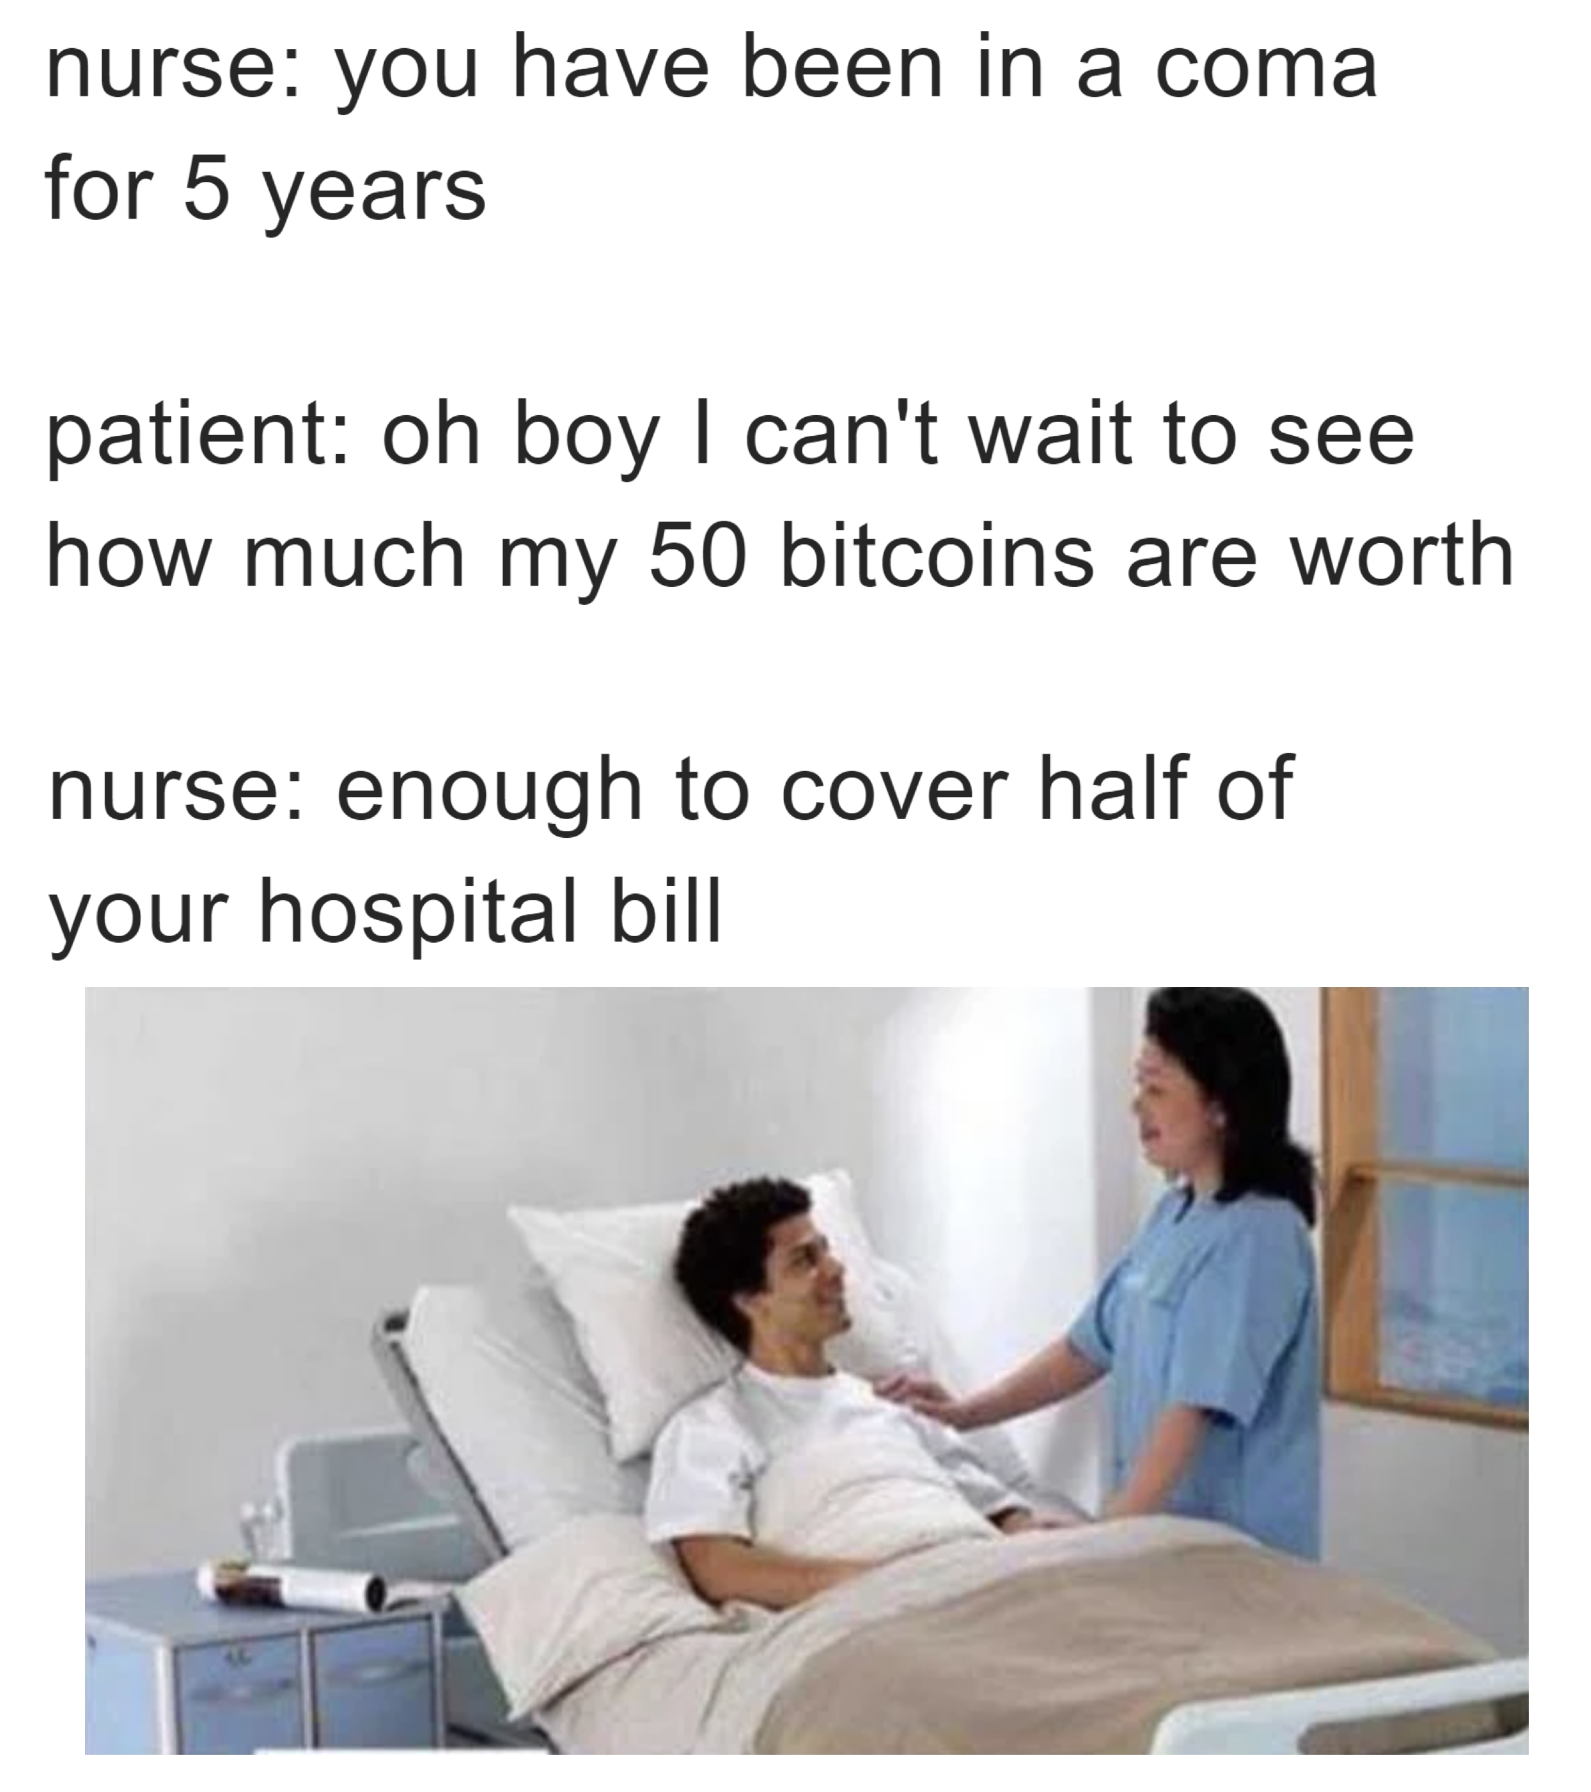 dank memes - i m back out my coma - nurse you have been in a coma for 5 years patient oh boy I can't wait to see how much my 50 bitcoins are worth nurse enough to cover half of your hospital bill